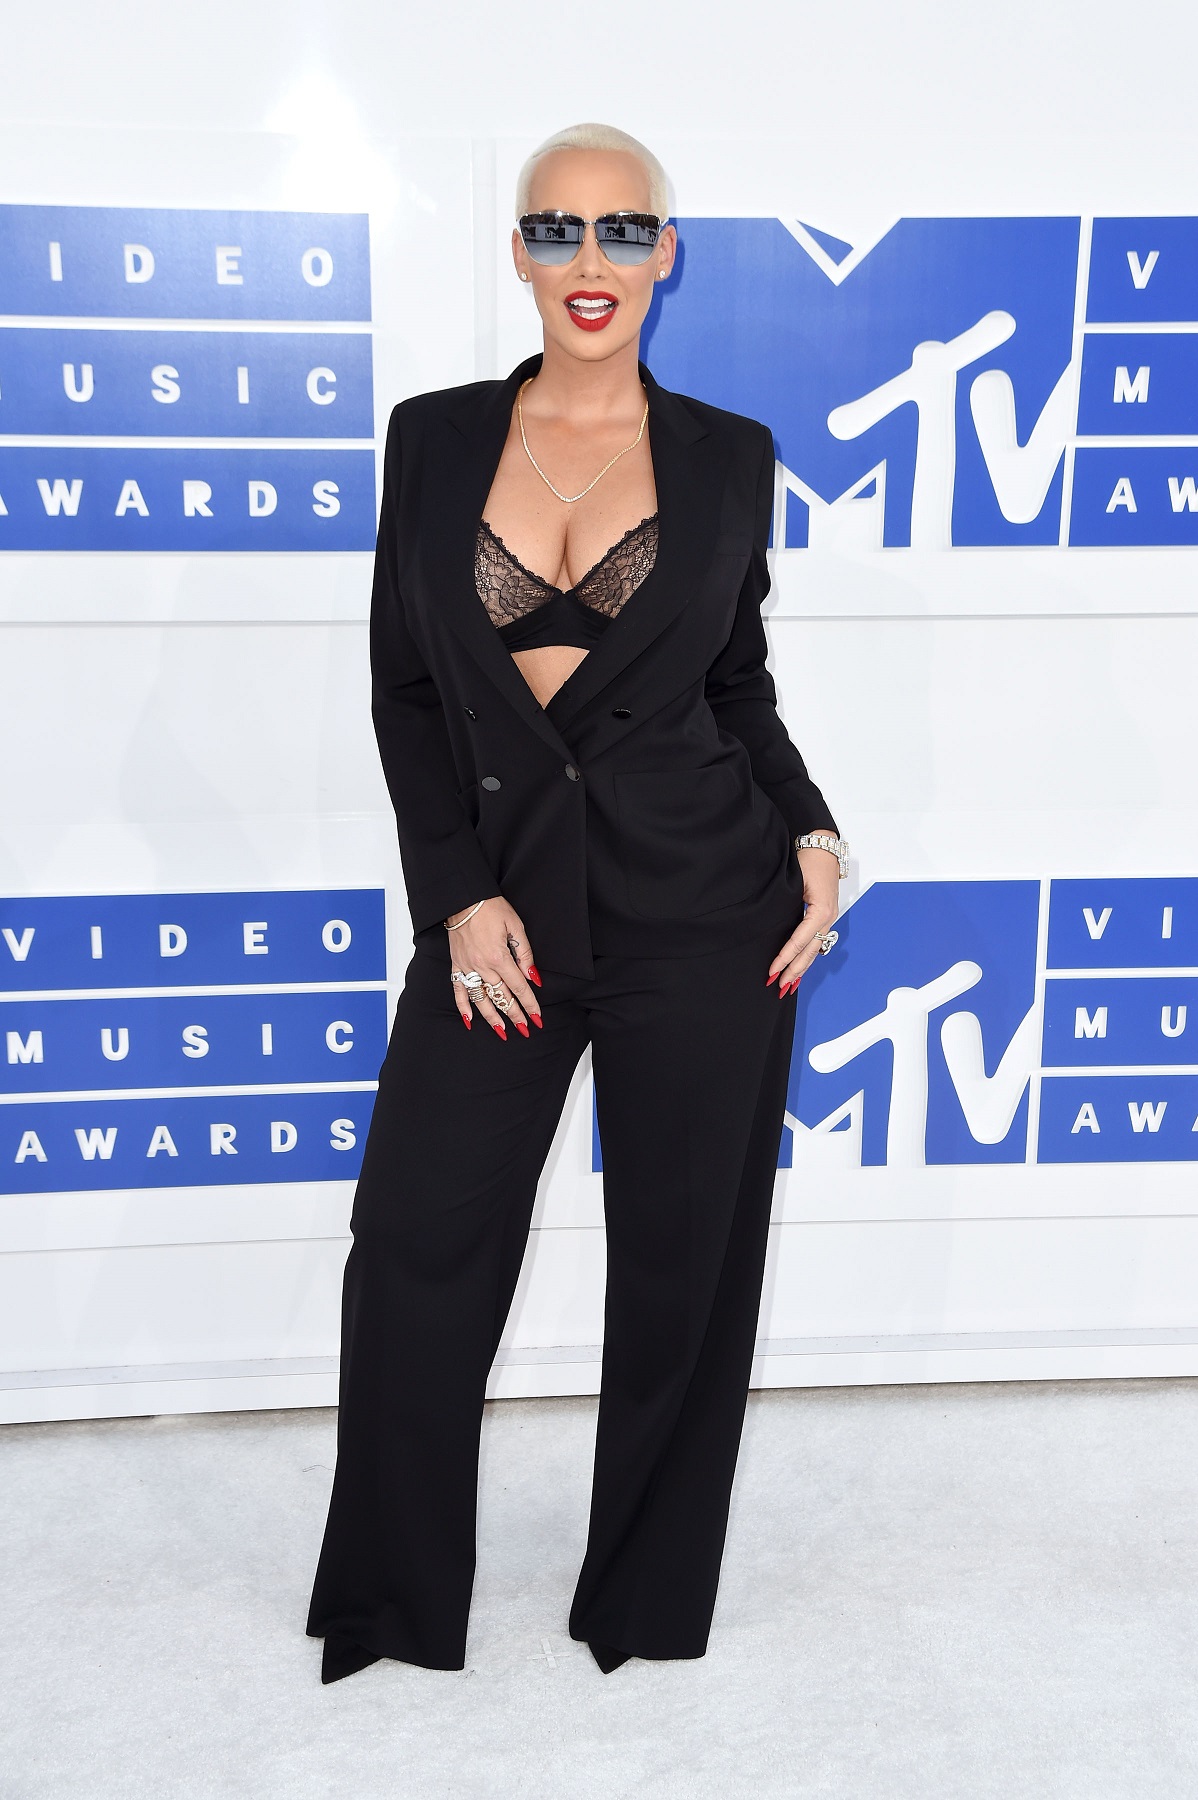 NEW YORK, NY - AUGUST 28: Model Amber Rose attends the 2016 MTV Video Music Awards at Madison Square Garden on August 28, 2016 in New York City. (Photo by Nicholas Hunt/FilmMagic)